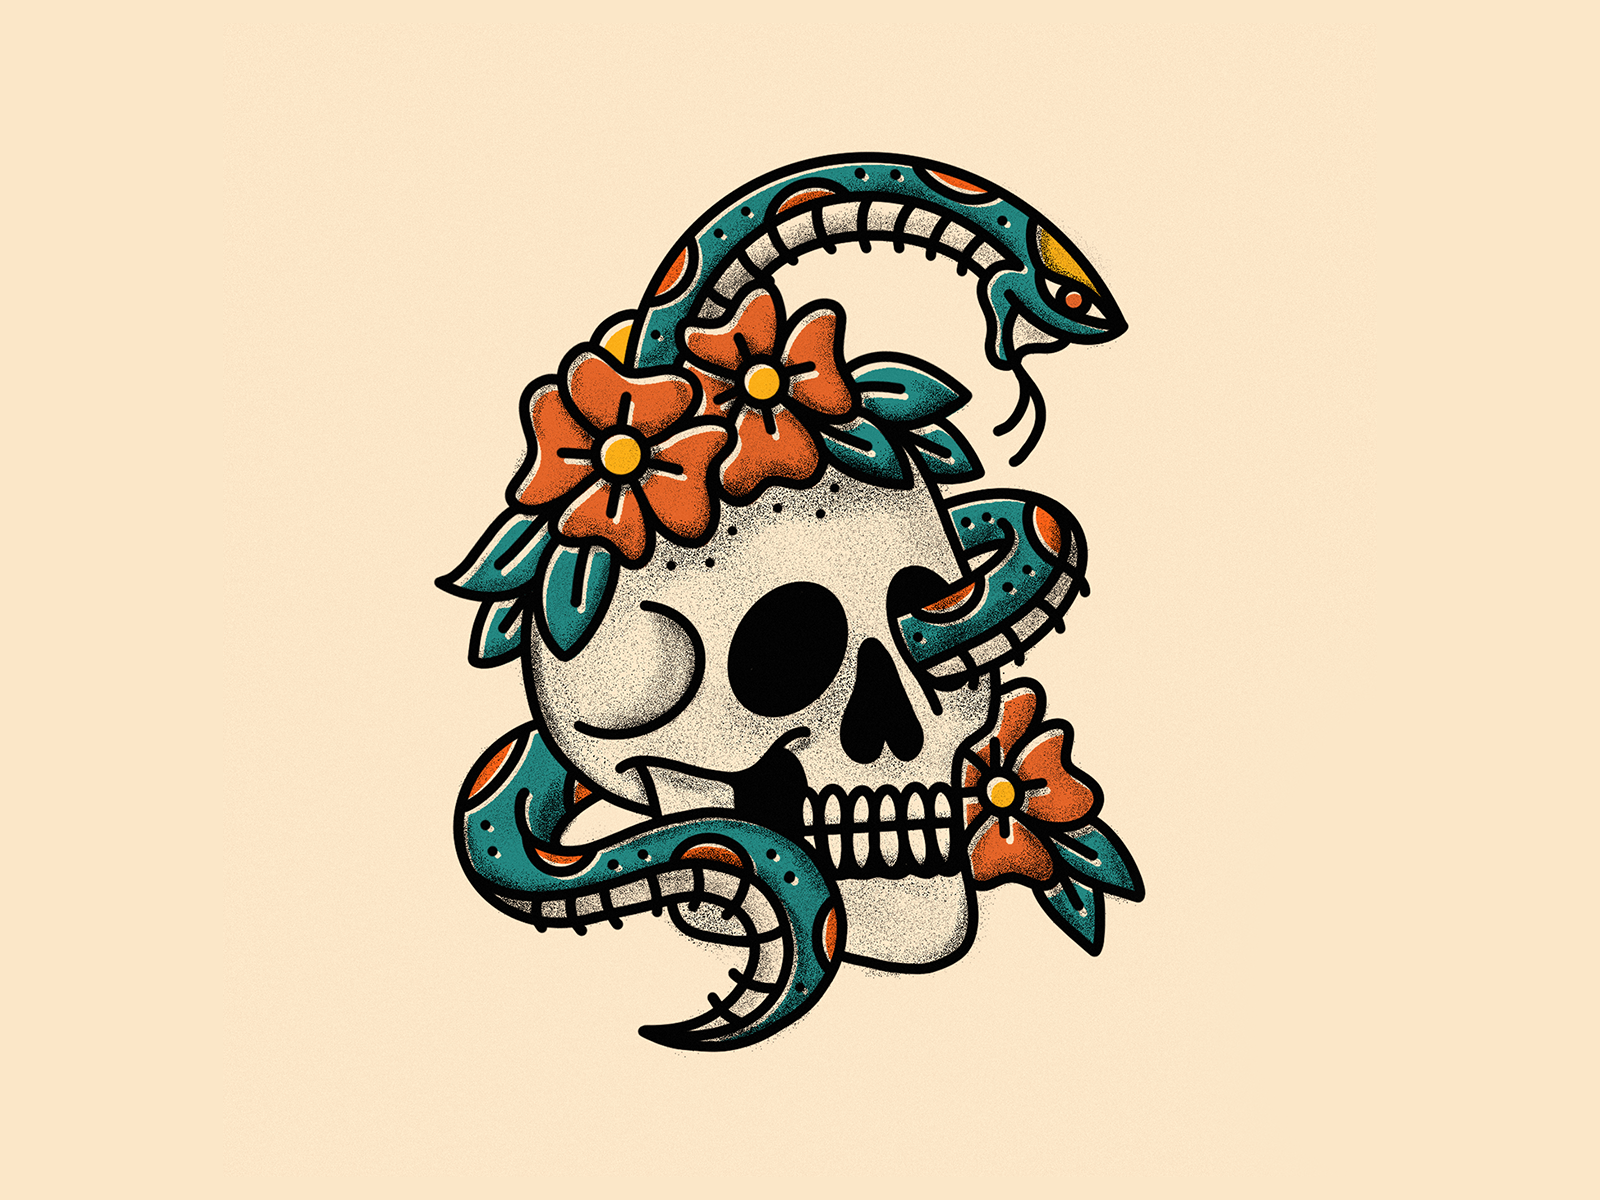 Dribbble - Snake_Skull-katiecooper-dribbble.png by Katie Cooper